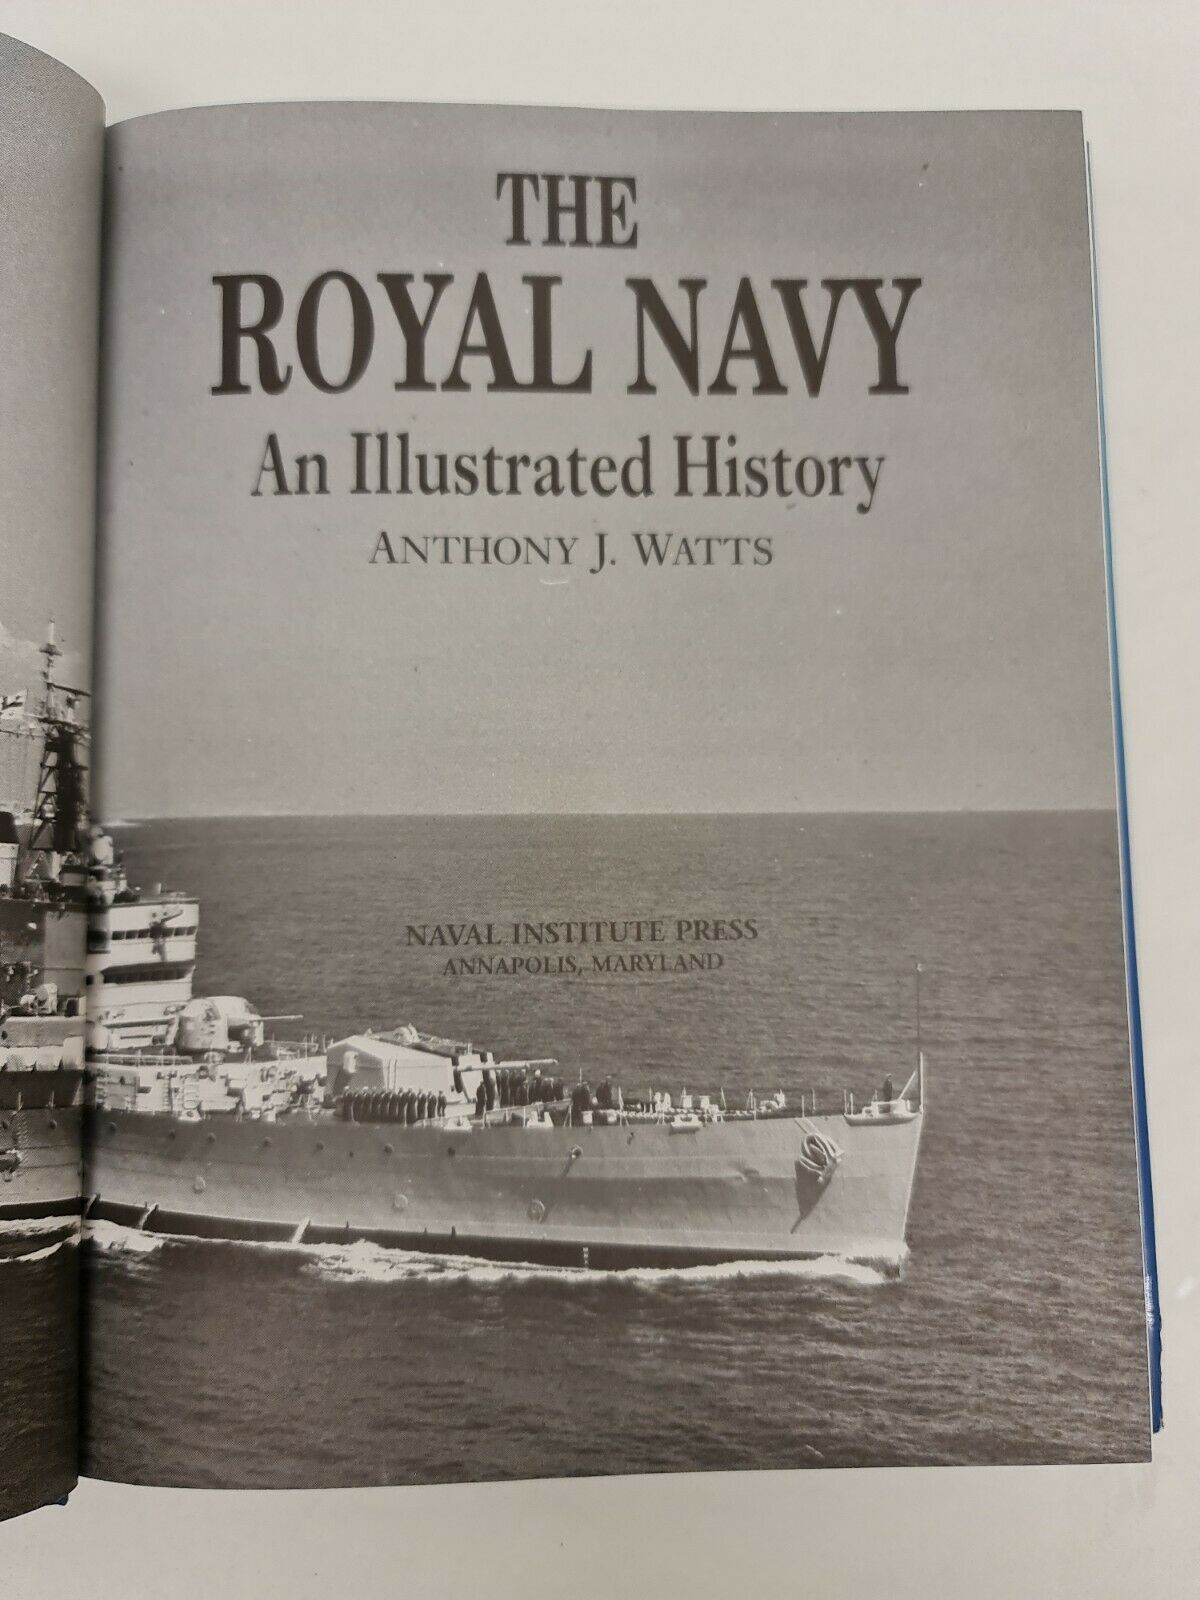 The Royal Navy: An Illustrated History by Anthony J. Watts